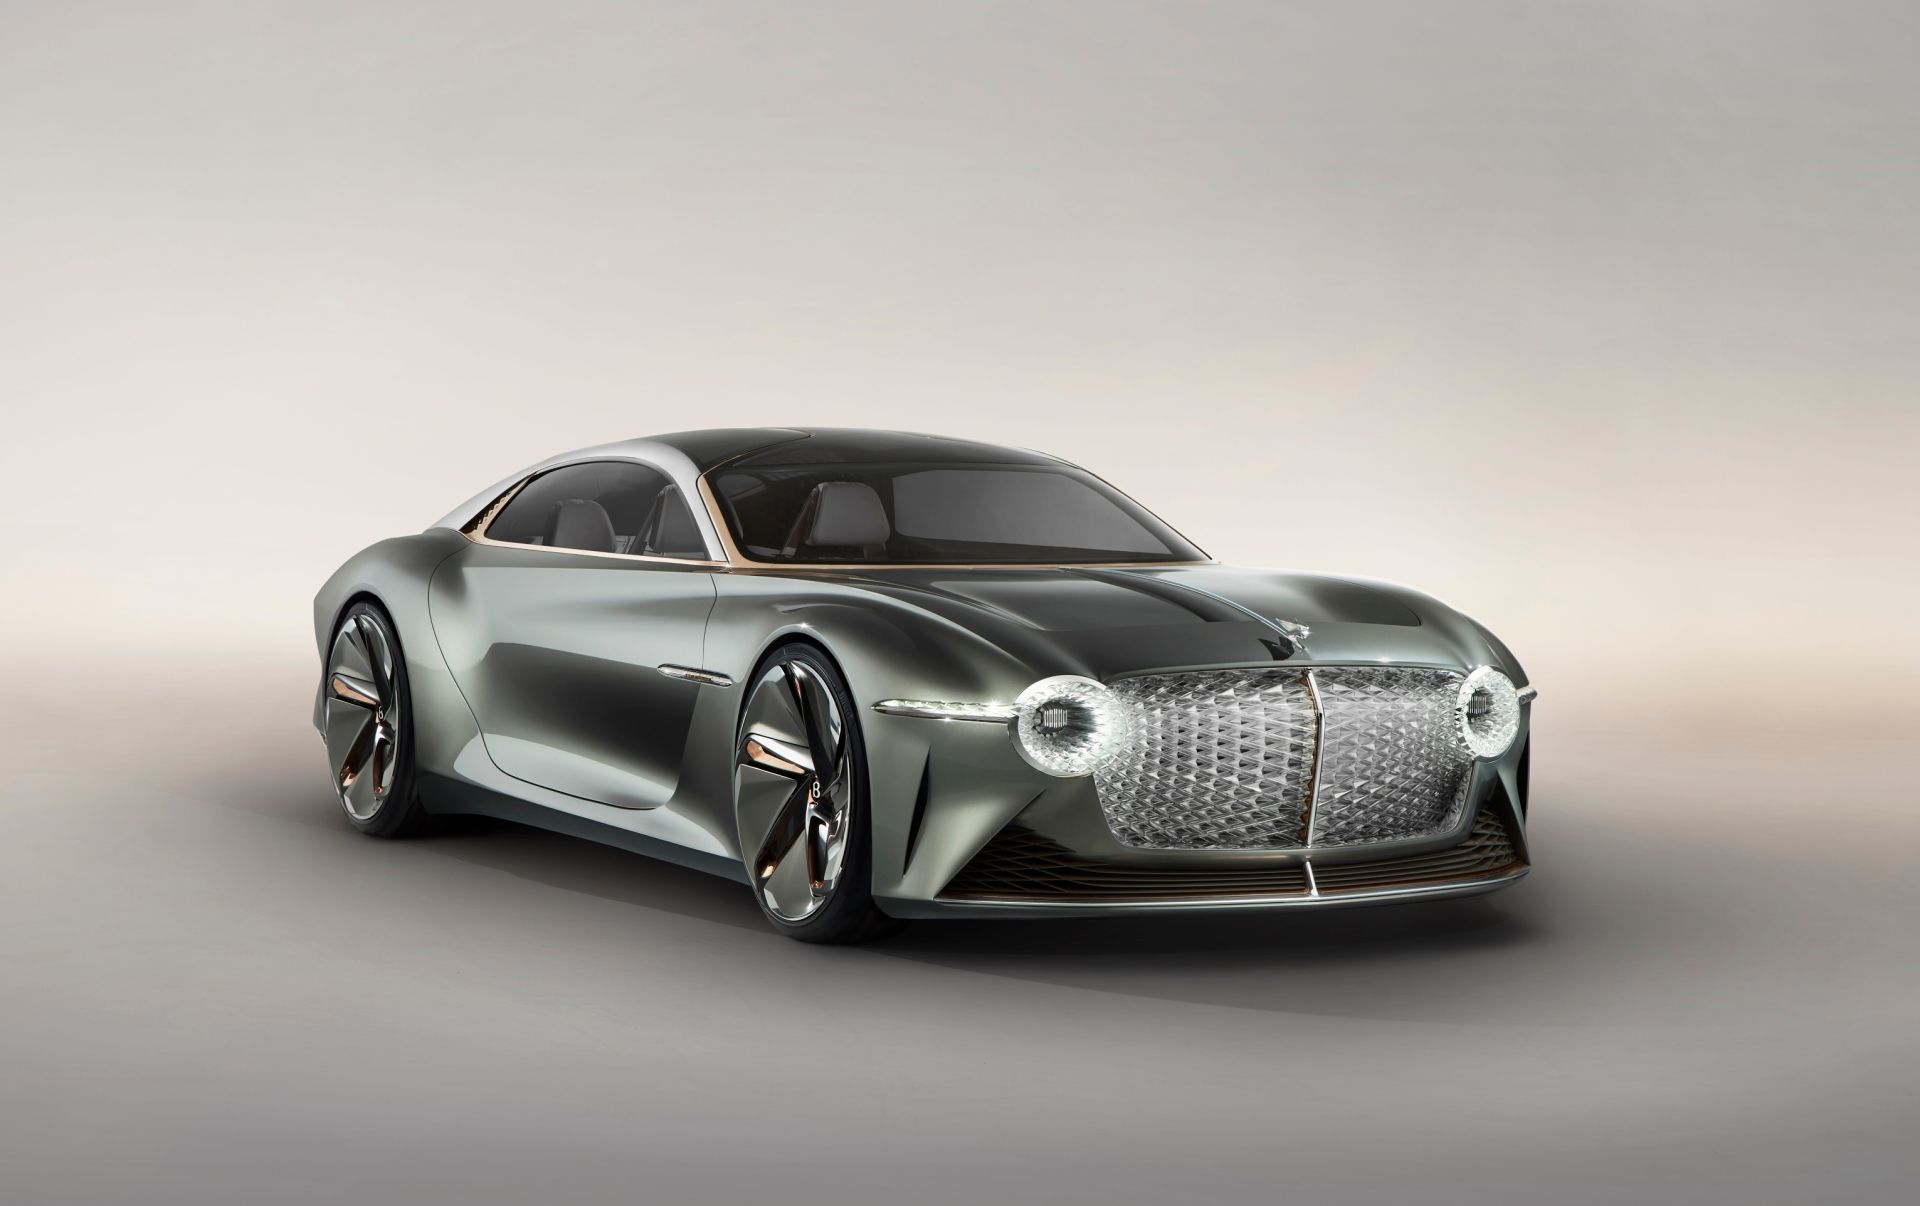 Bentley has unveiled its vision for the deluxe GT in 2035